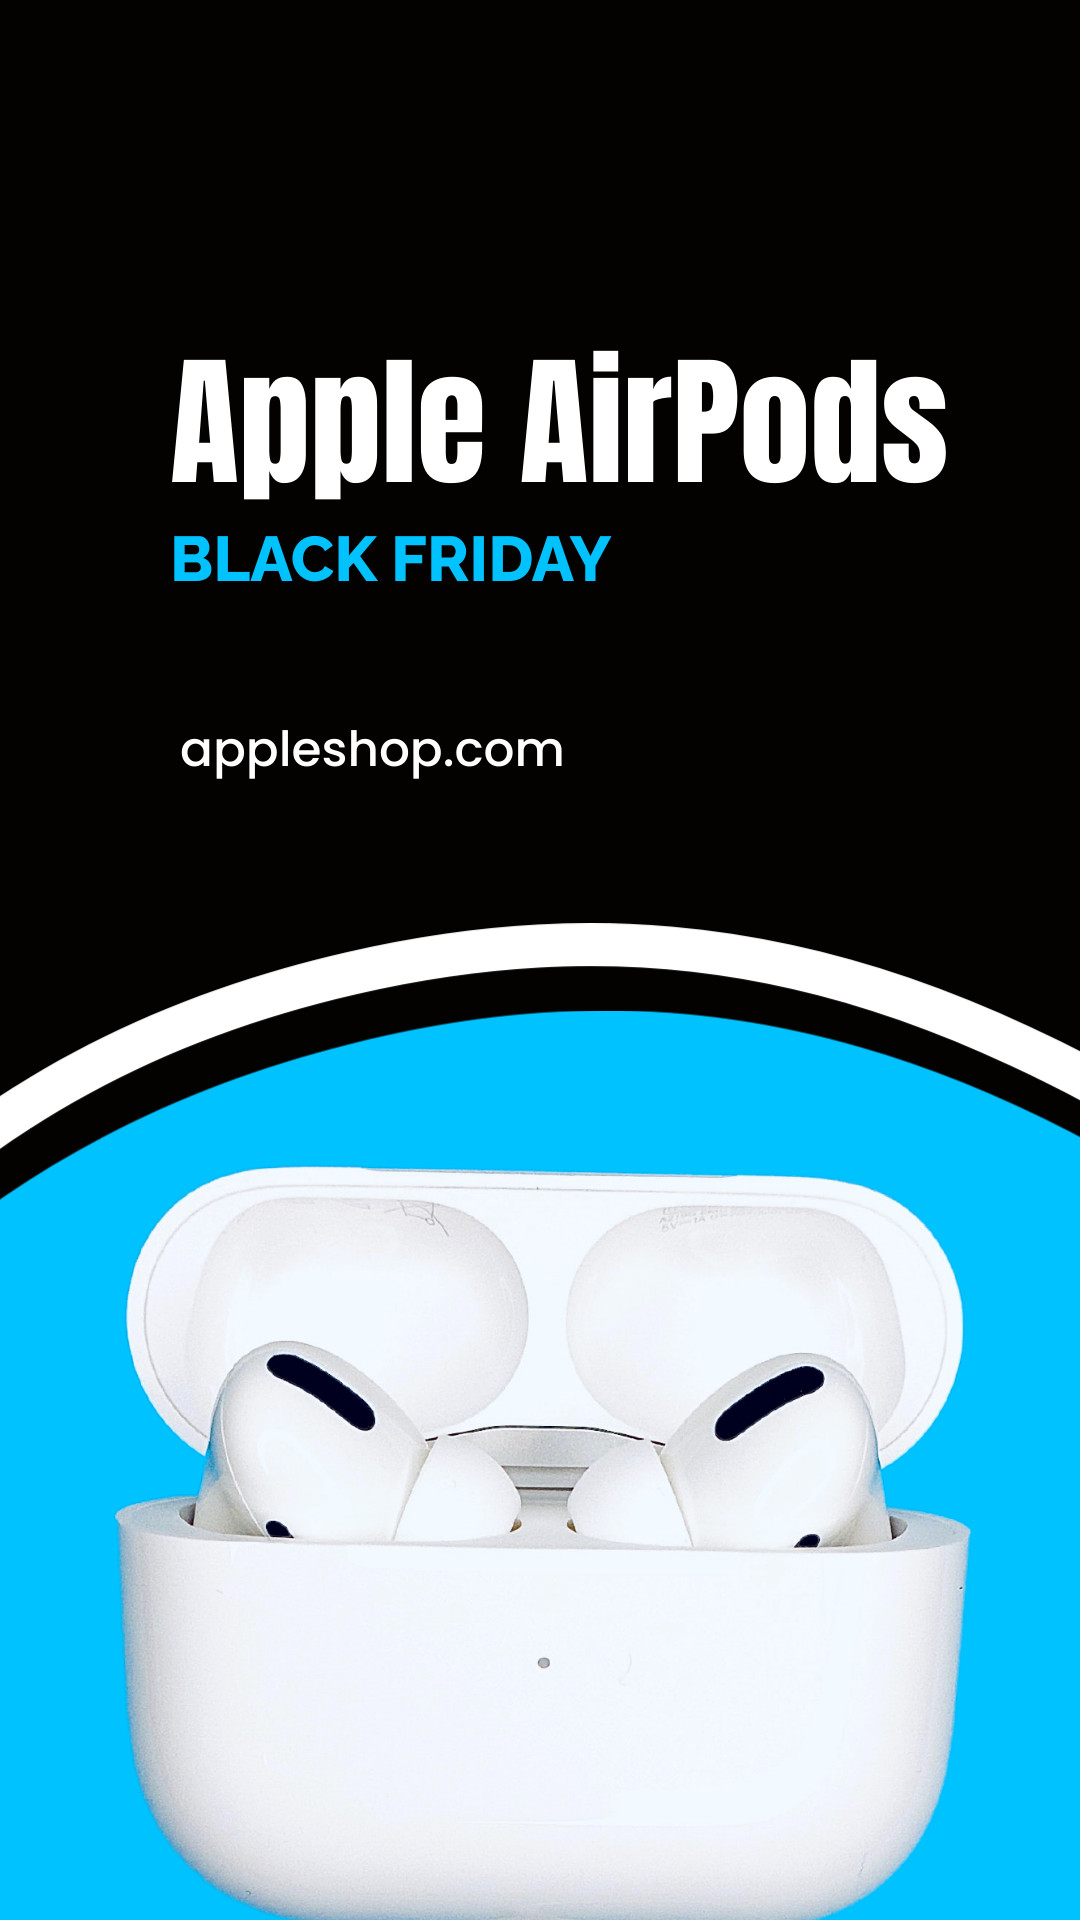 Apple AirPods Black Friday